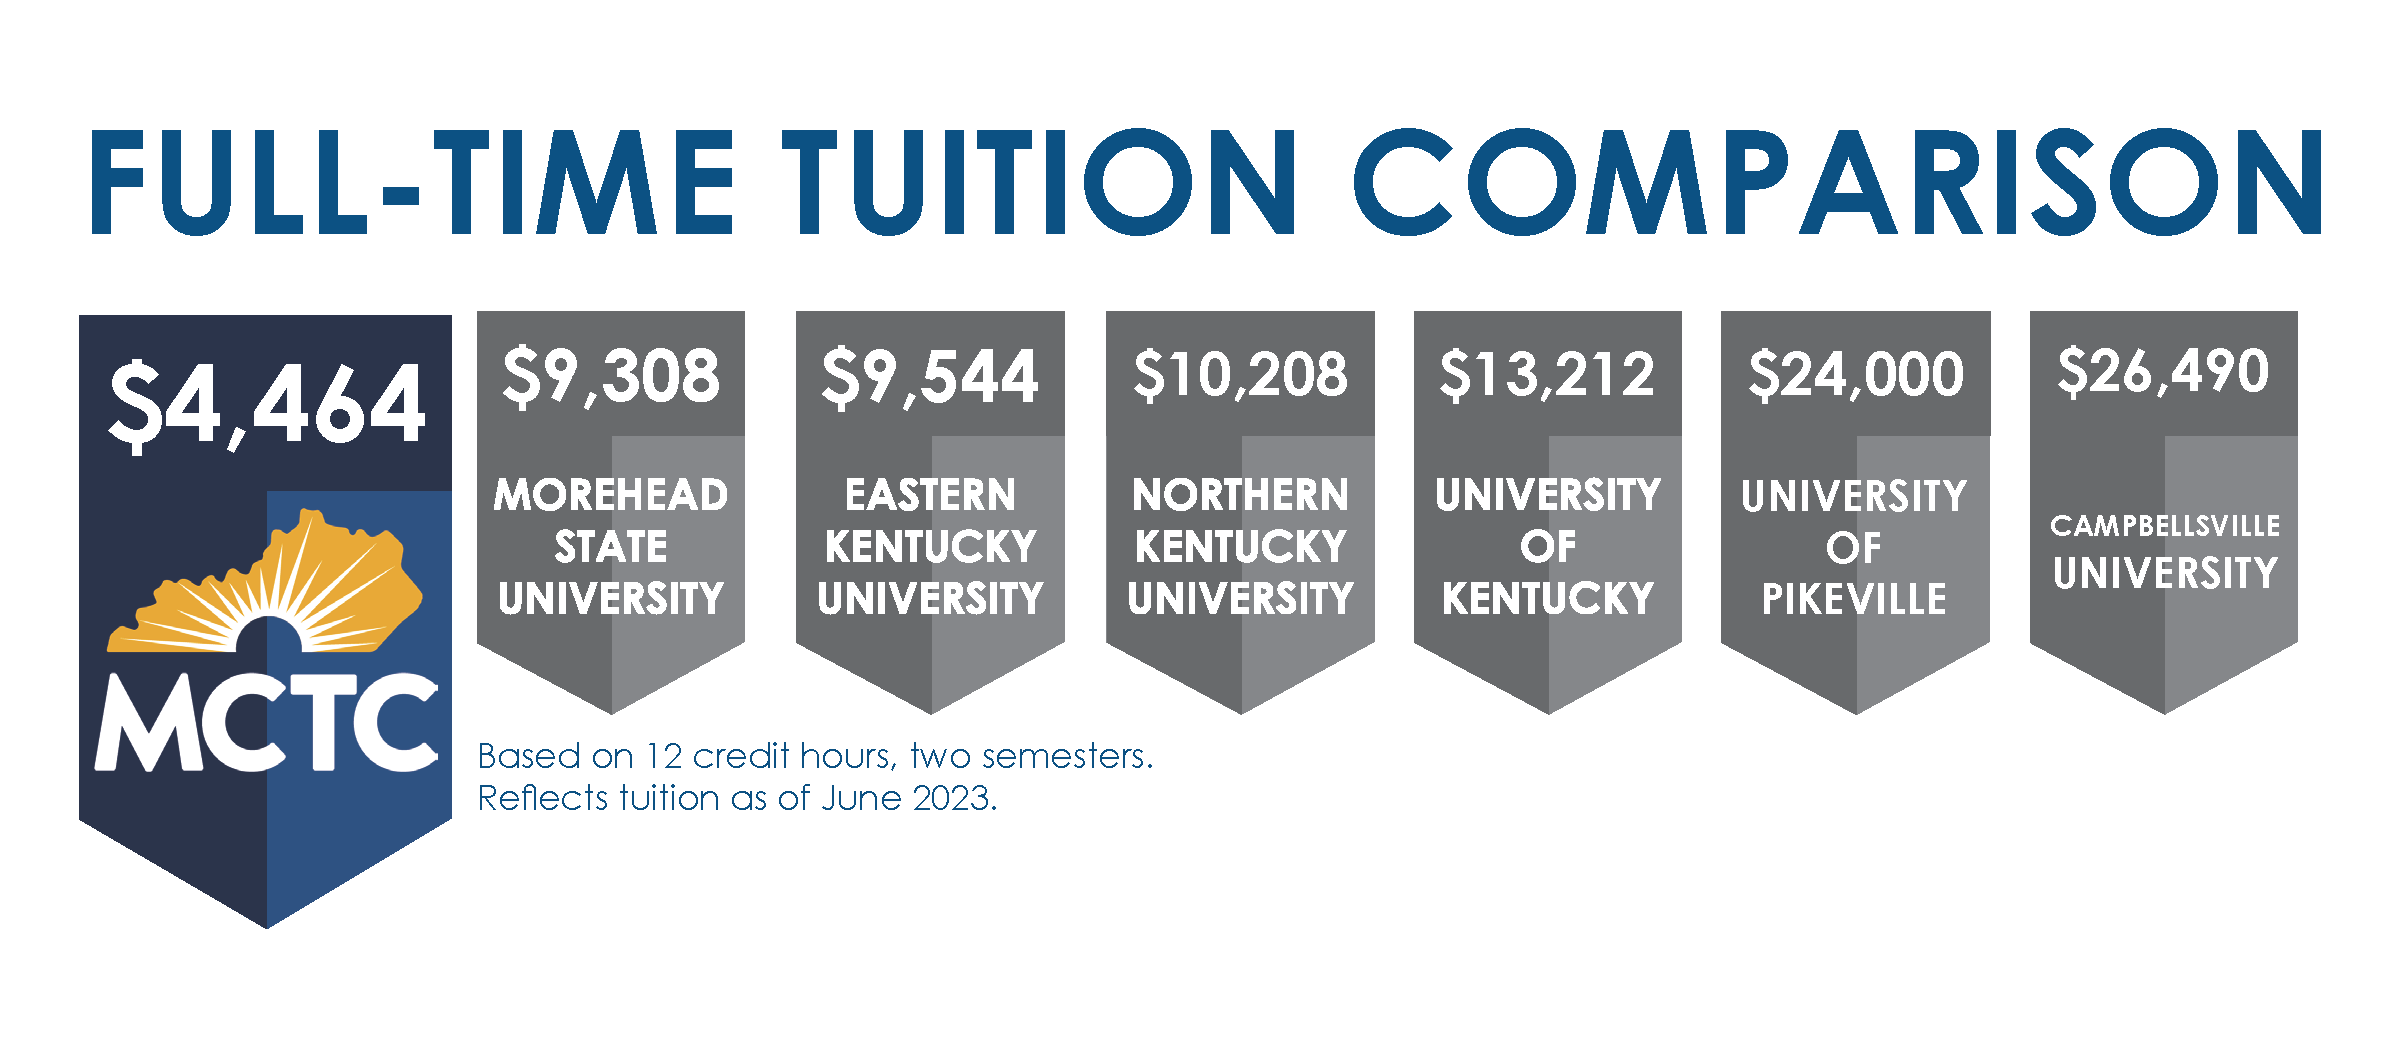 Tuition comparison. MCTC has the lowest college tuition in the state of KY.